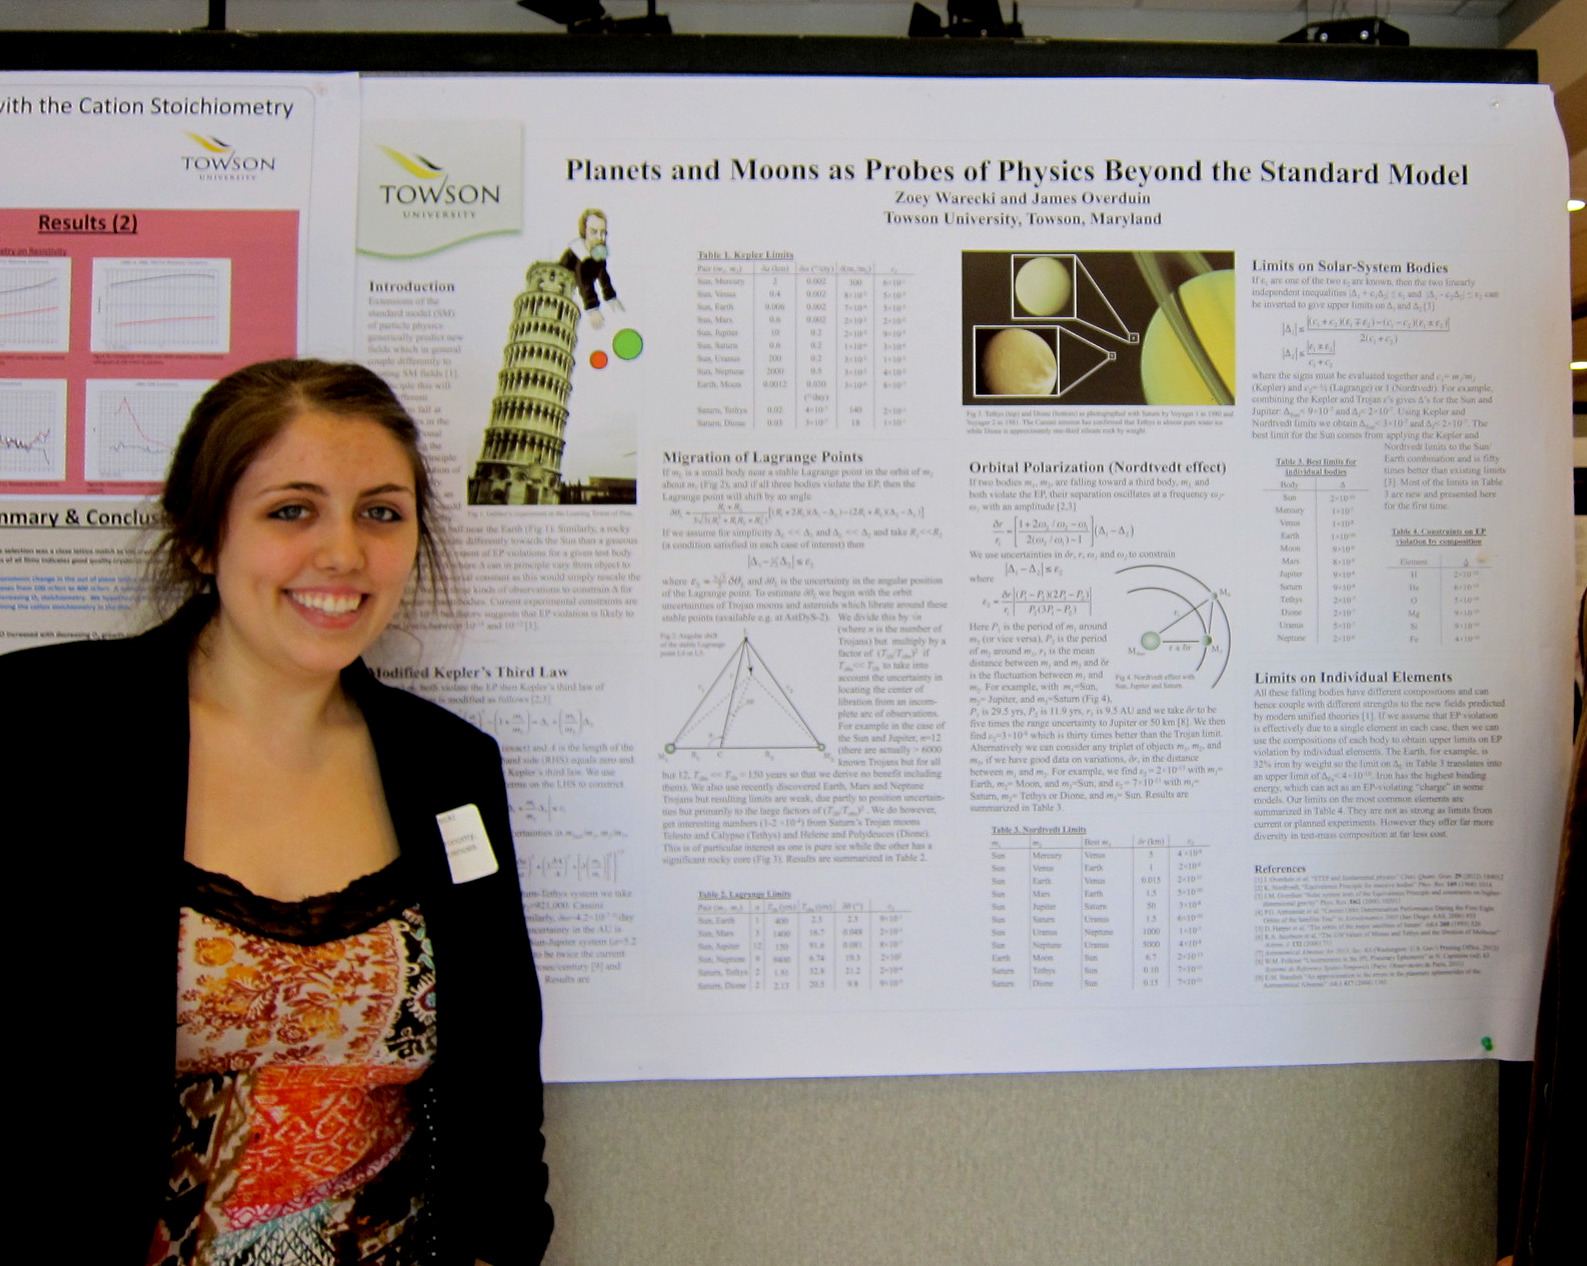 Making the equivalence principle sound easy at the Towson University Student Research Expo (2013)